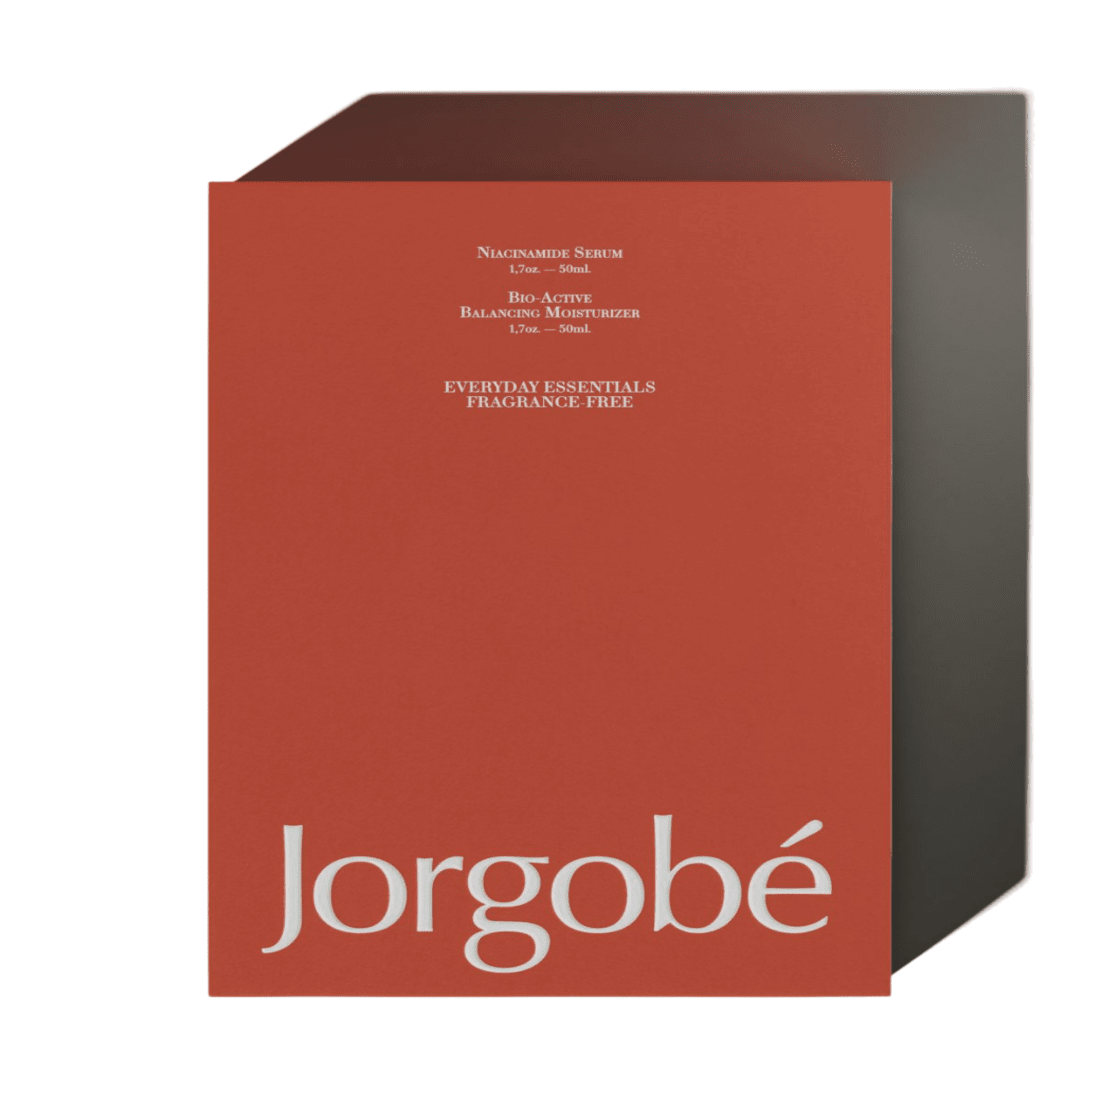 The Jorgobé - Everyday Essentials Fragrance Free cover features the word "Jorgobé" prominently displayed.